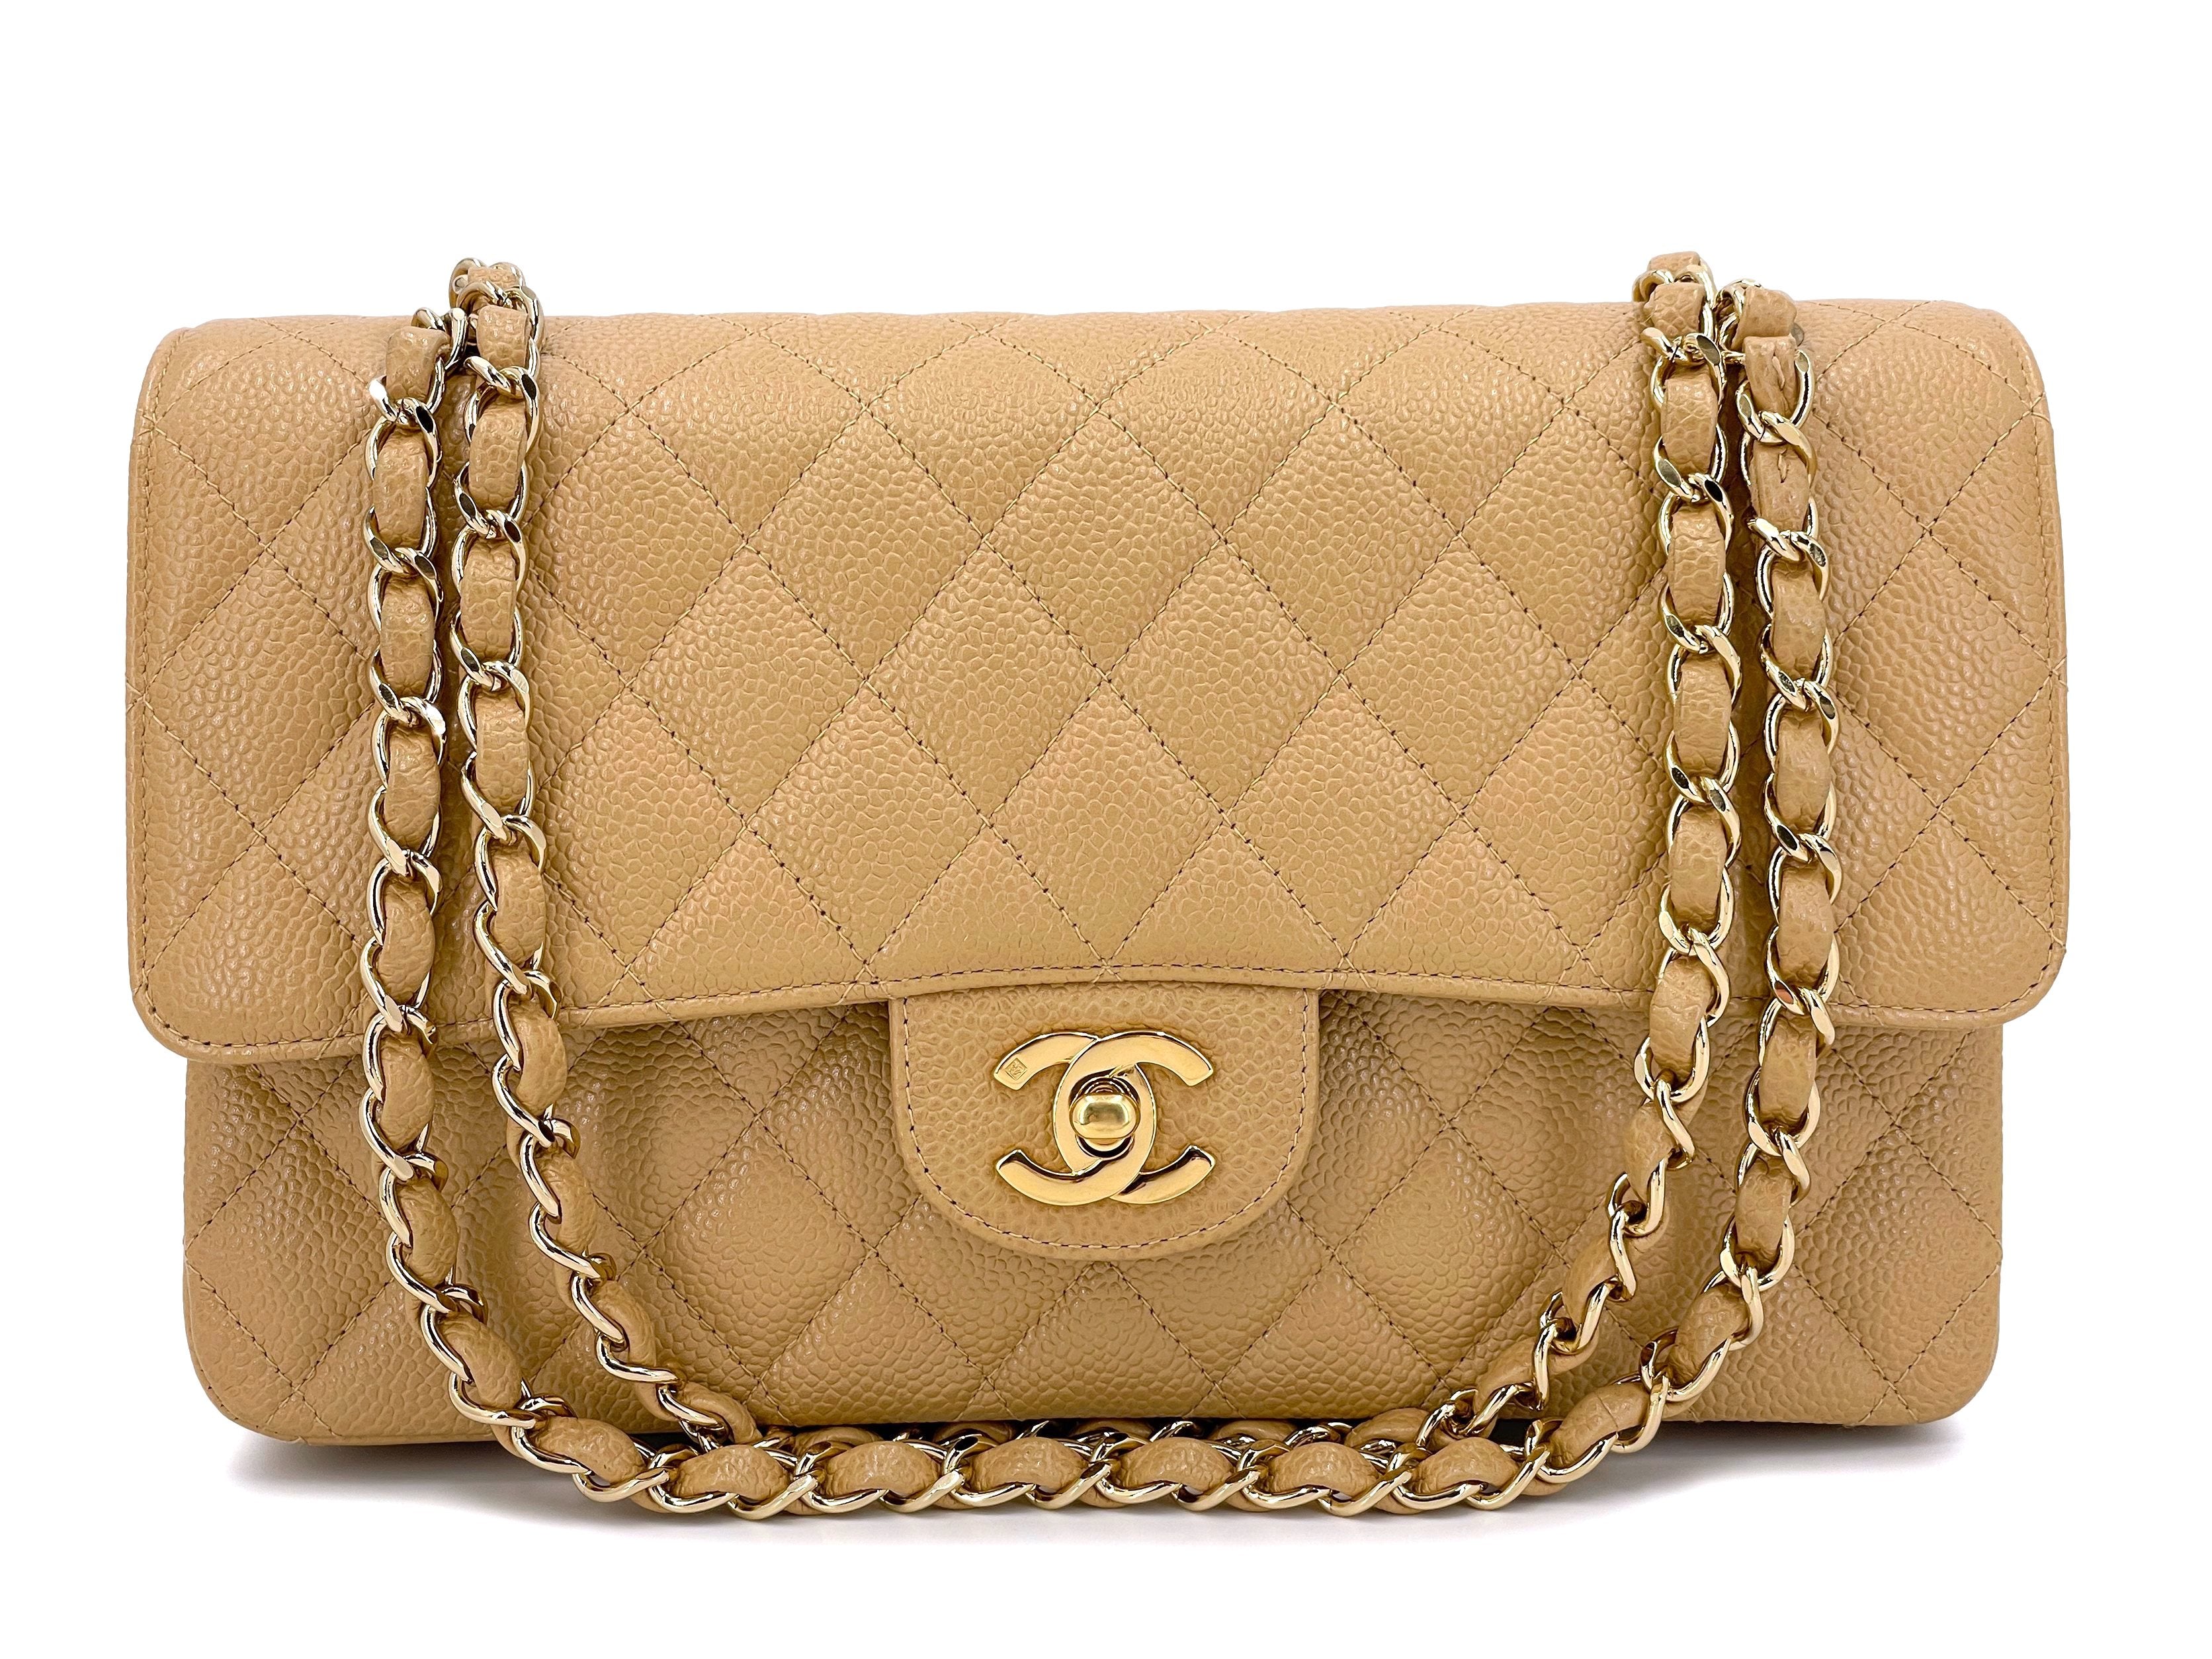 Chanel Vintage Cream Caviar Leather Chain Pouch